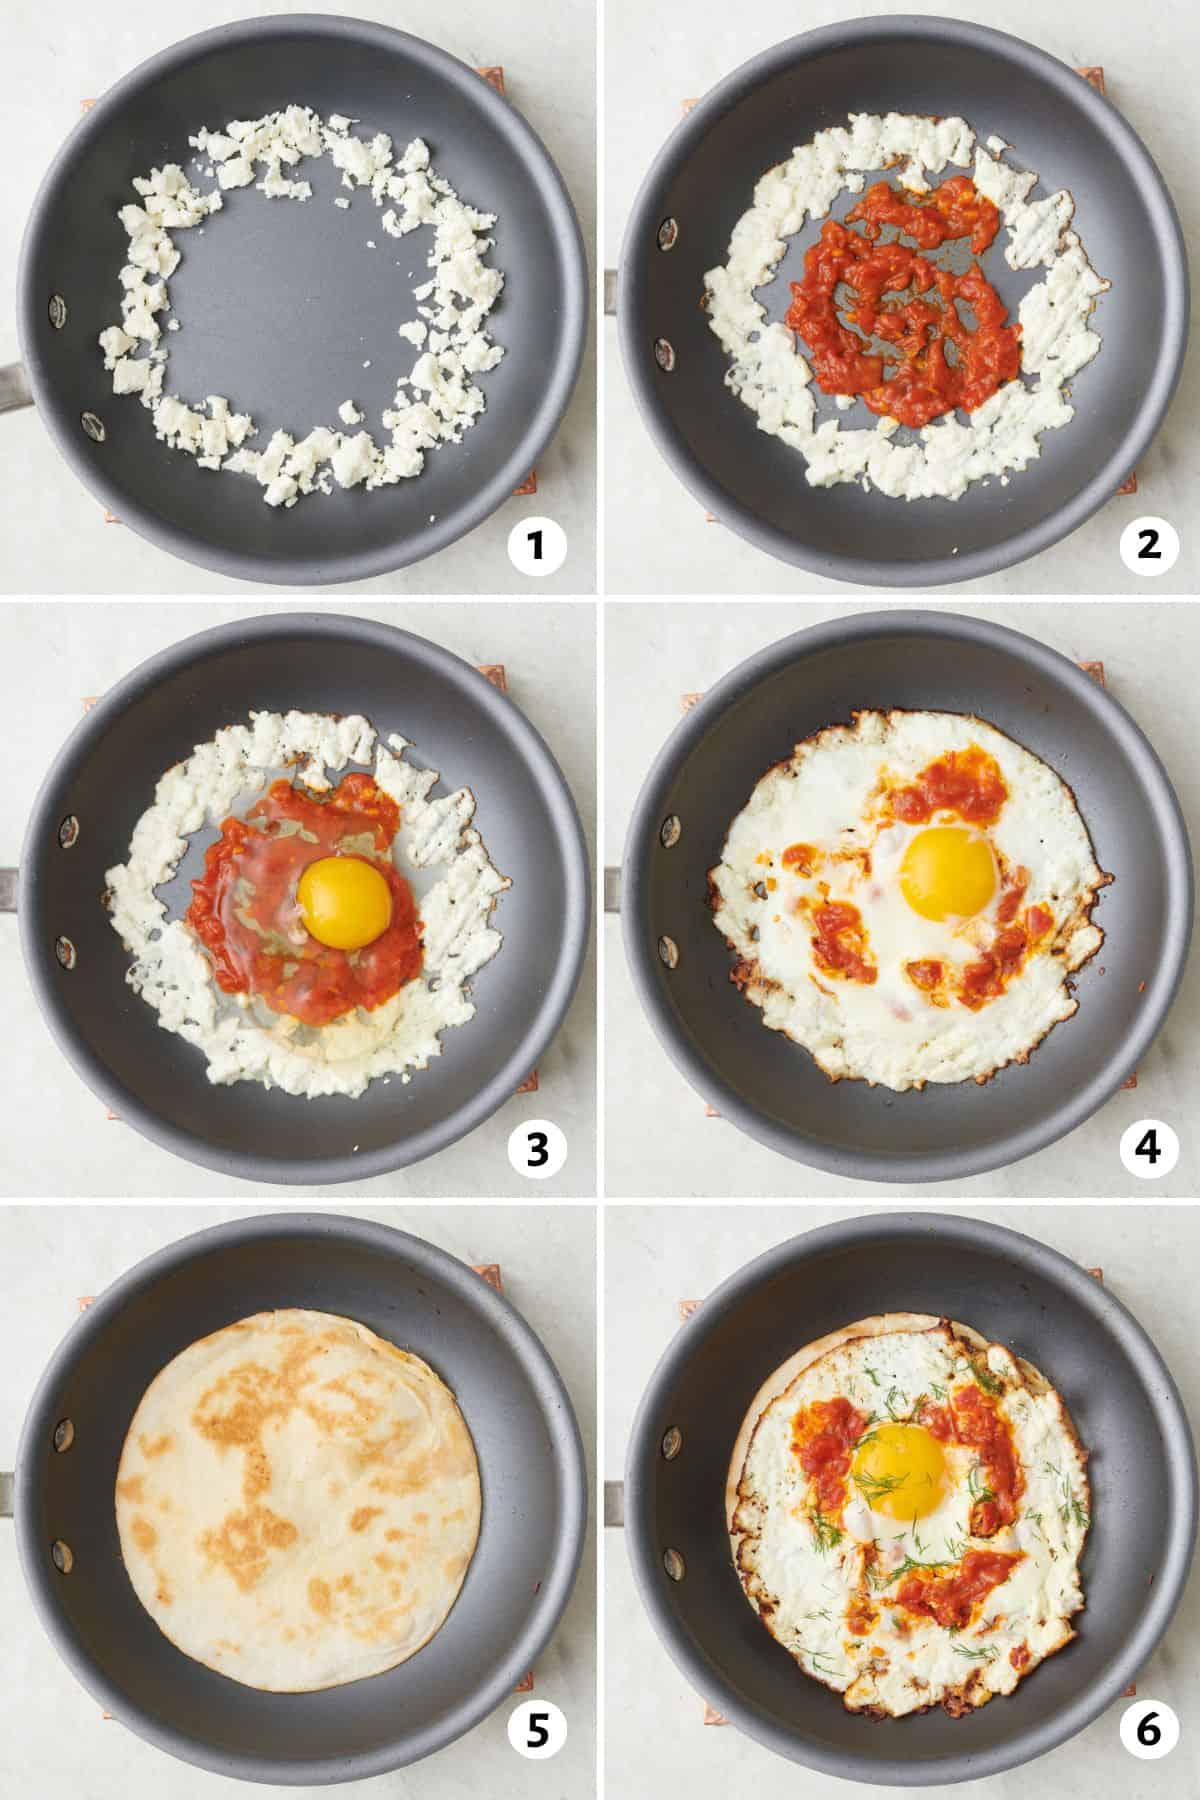 6 image collage making recipe: 1- crumbled feta on the outside of pan, 2- harissa paste added to the center, 2- after feta is slightly crisped with an egg added on top, 5- after the egg has cooked, feta egg removed and a tortilla shell added, 6- cook harissa feta egg added on top of tortilla.